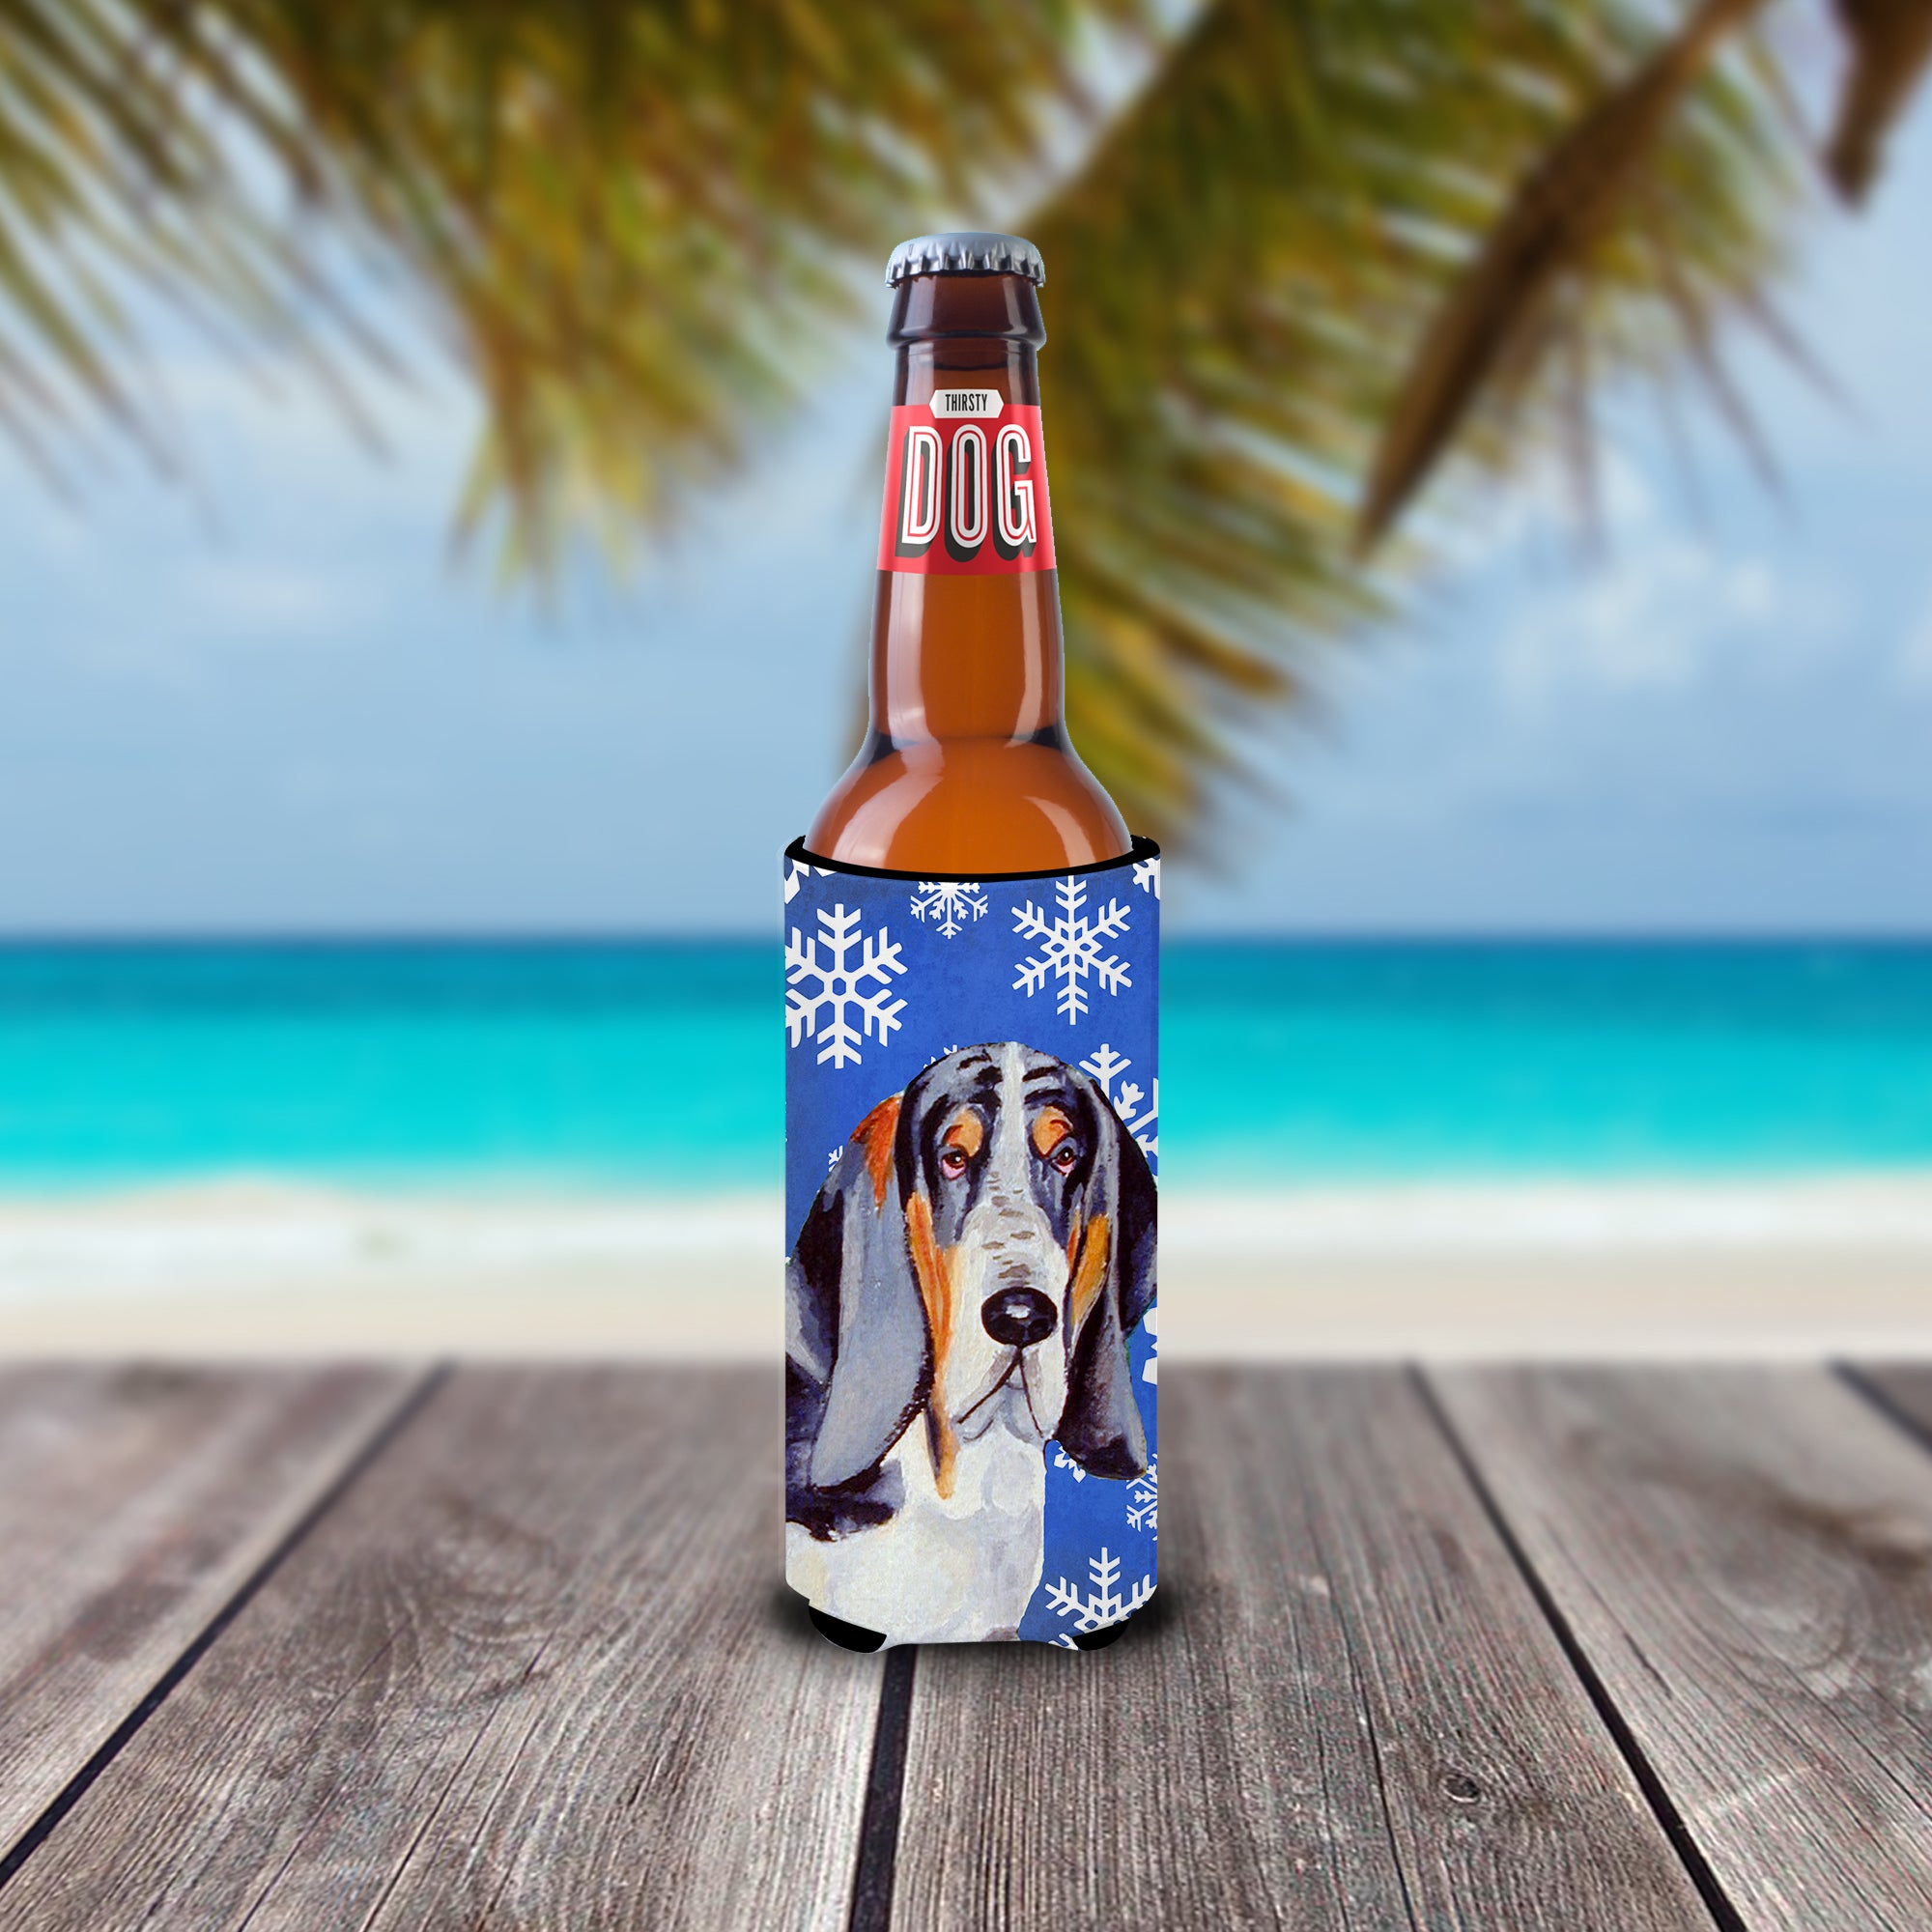 Basset Hound Winter Snowflakes Holiday Ultra Beverage Insulators for slim cans LH9282MUK.